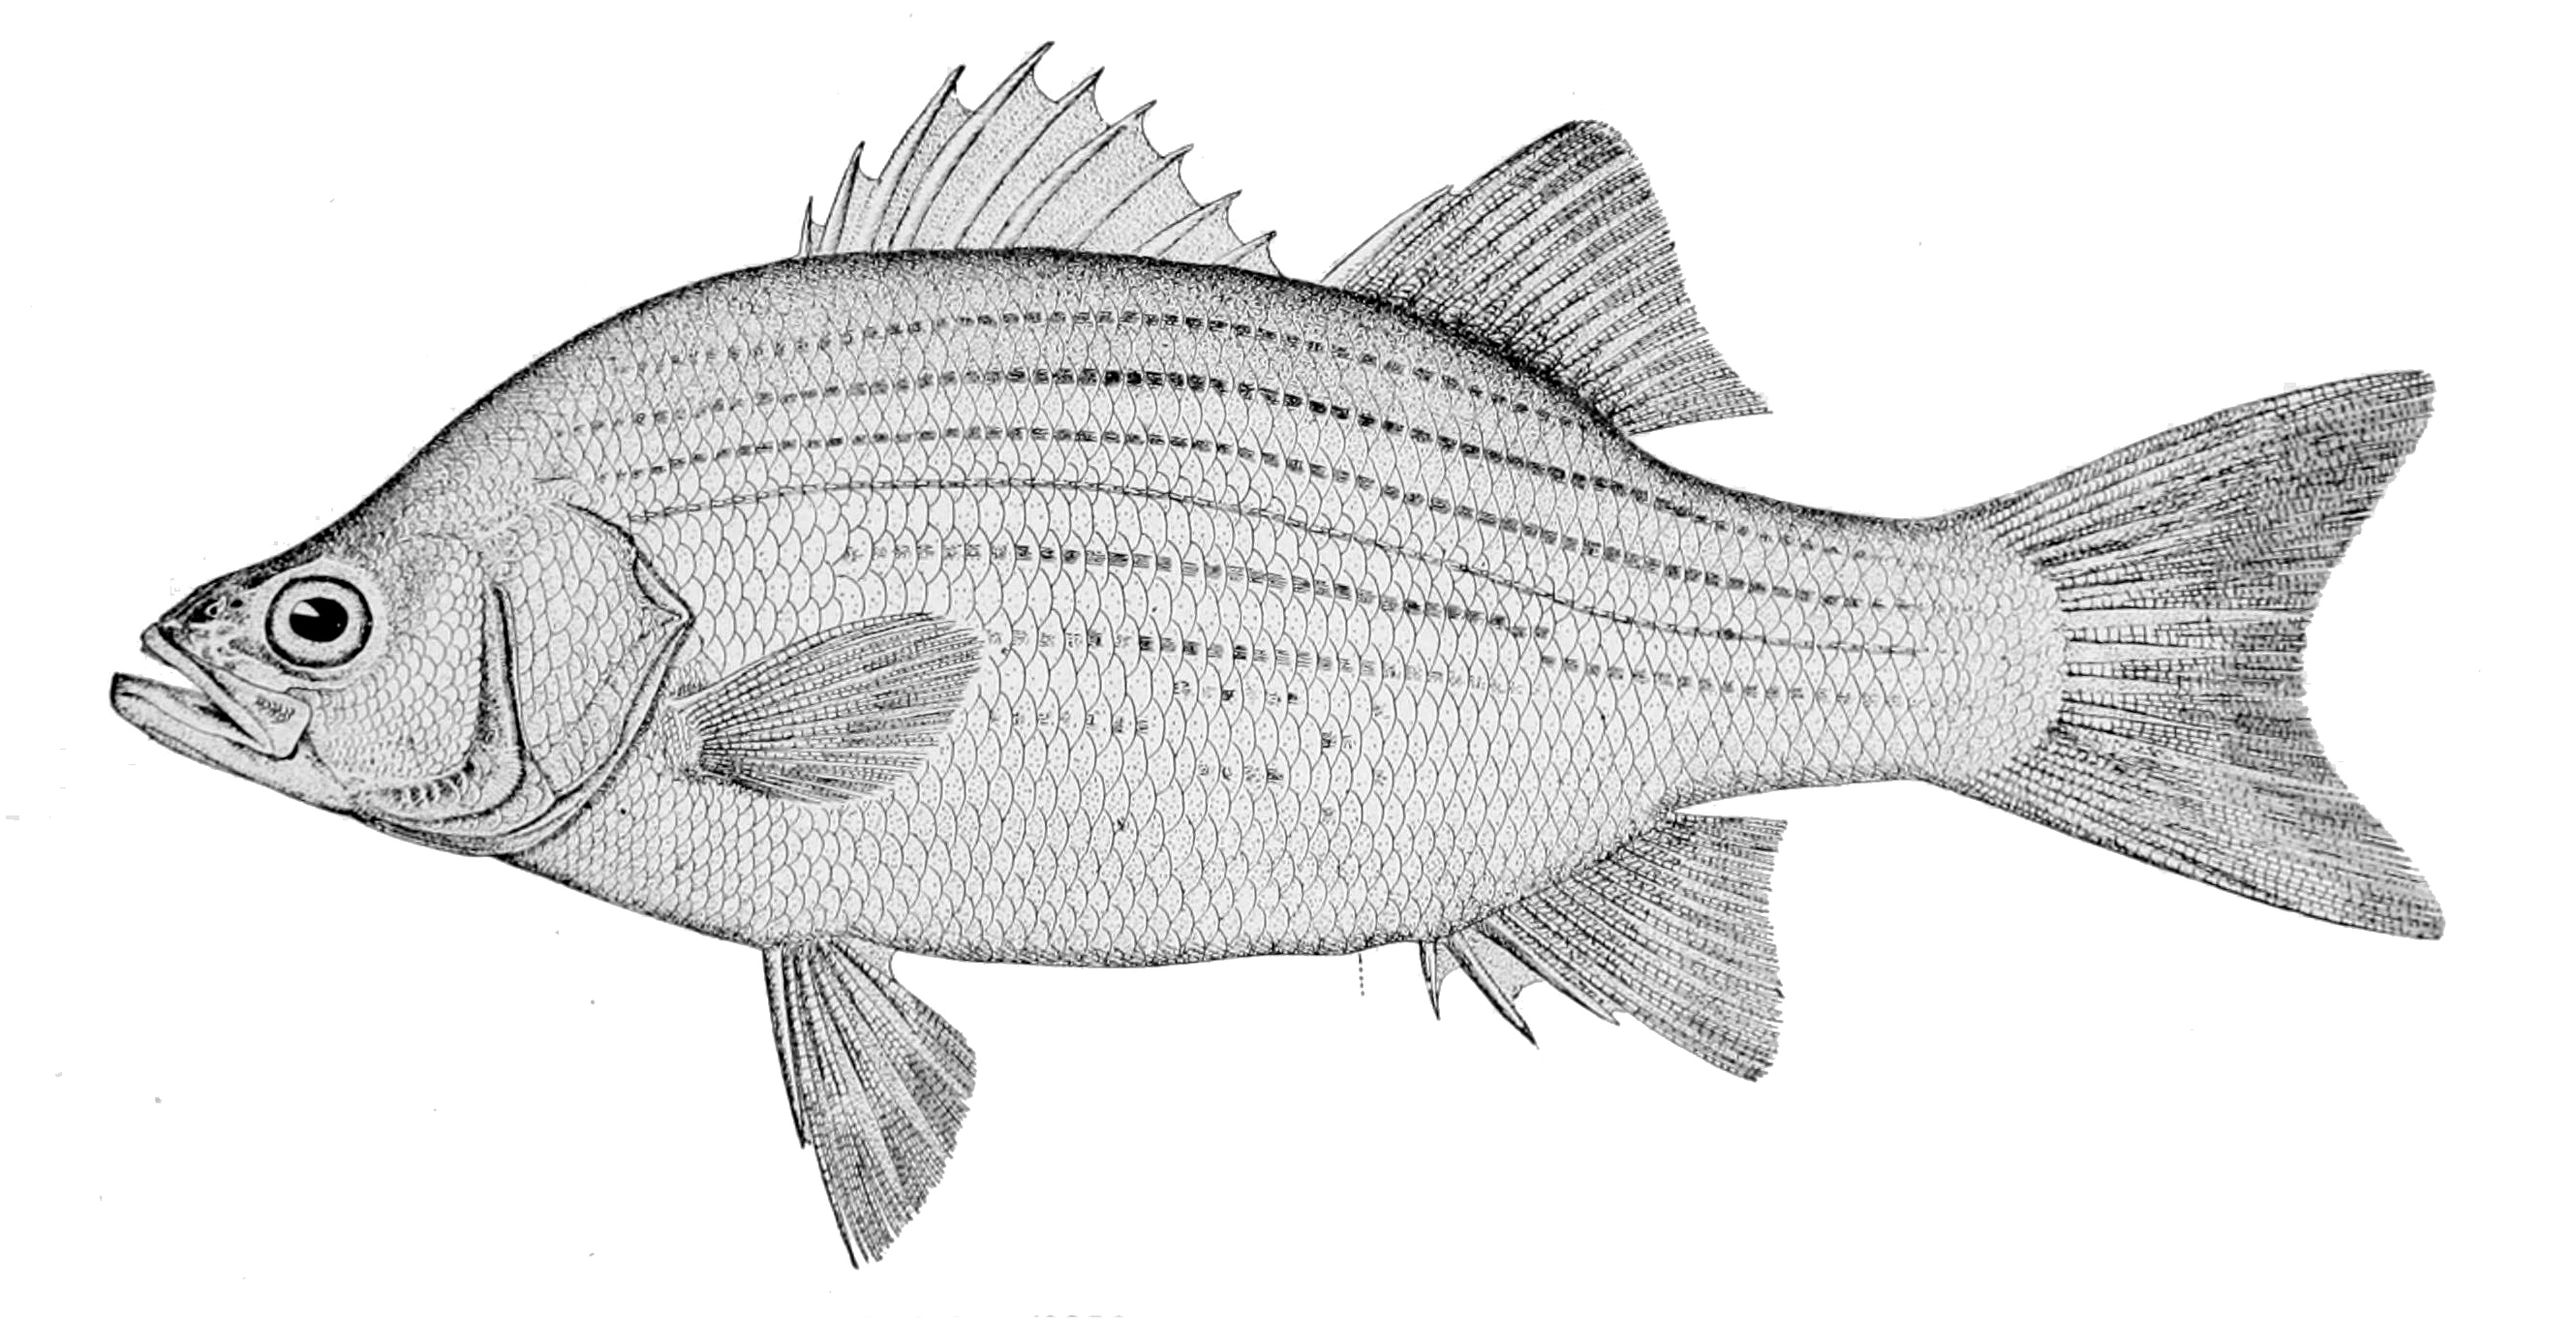 Image of white bass